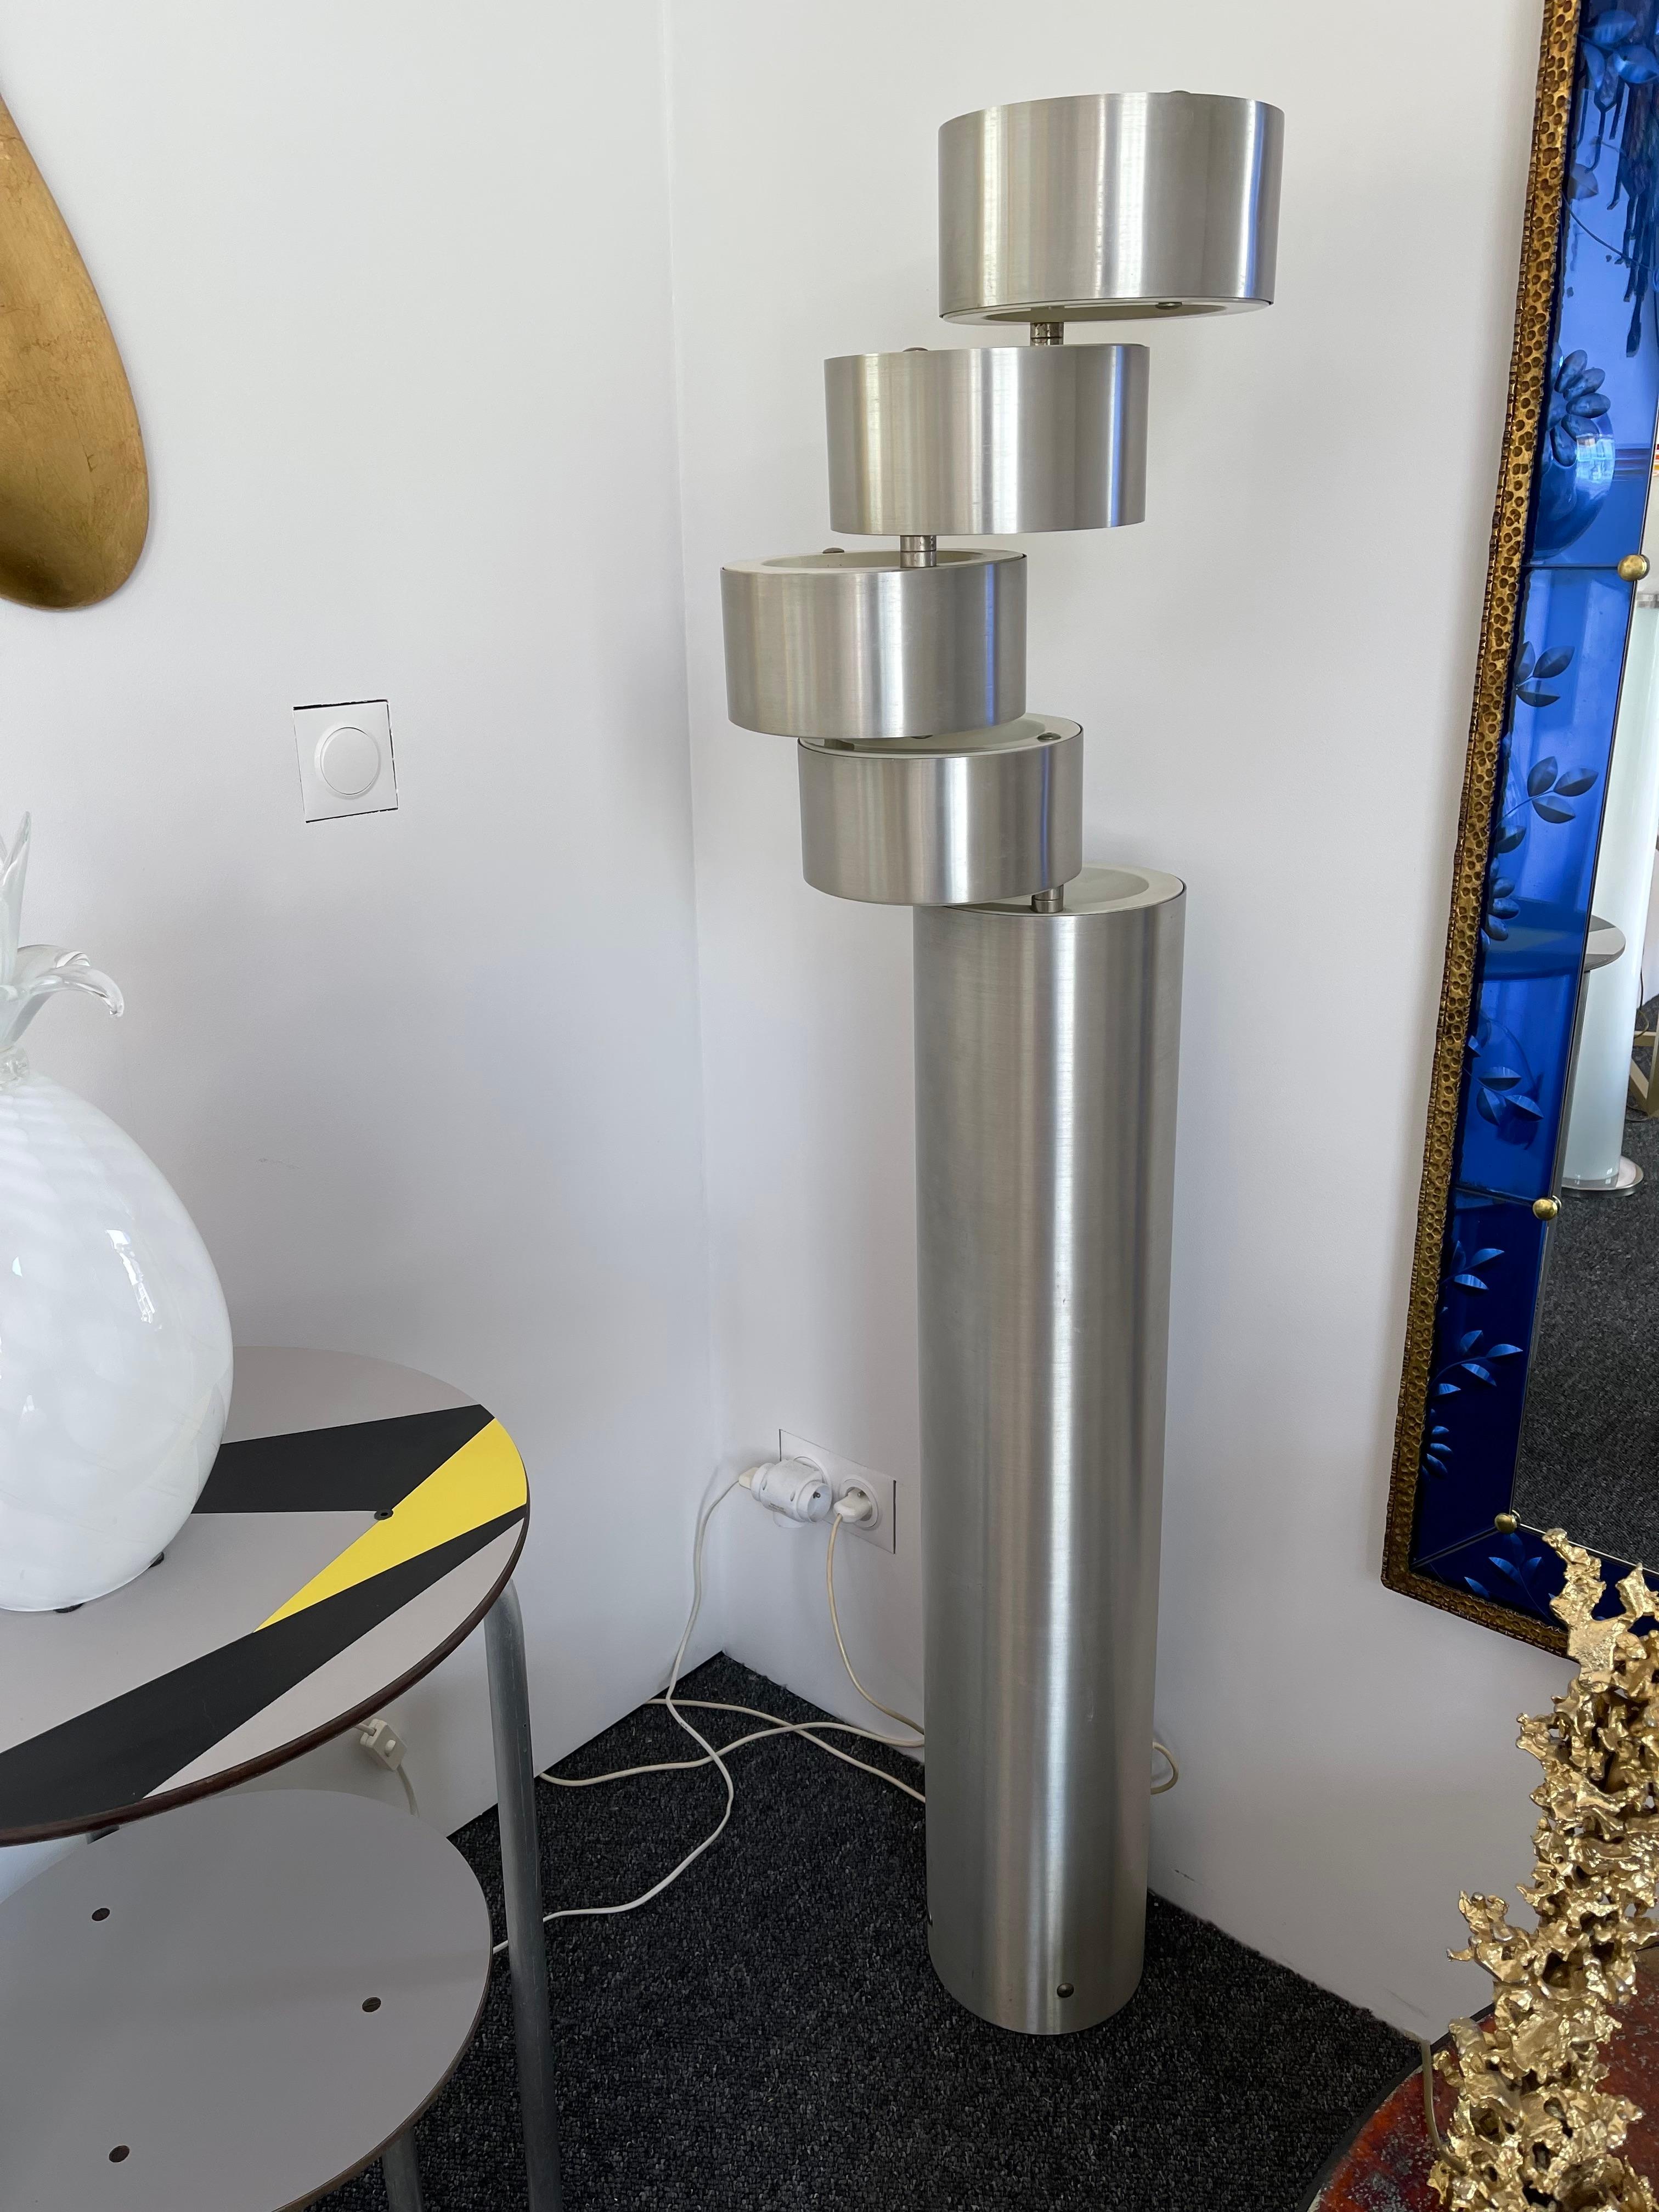 Rare Mid-Century Modern articulated modular floor lamp in brushed stainless steel by the editor Stilux Milano. Original stamp Stilux Milano in one of the diffusor. Measurements indicated in close position. Famous design like Reggiani, Sciolari,